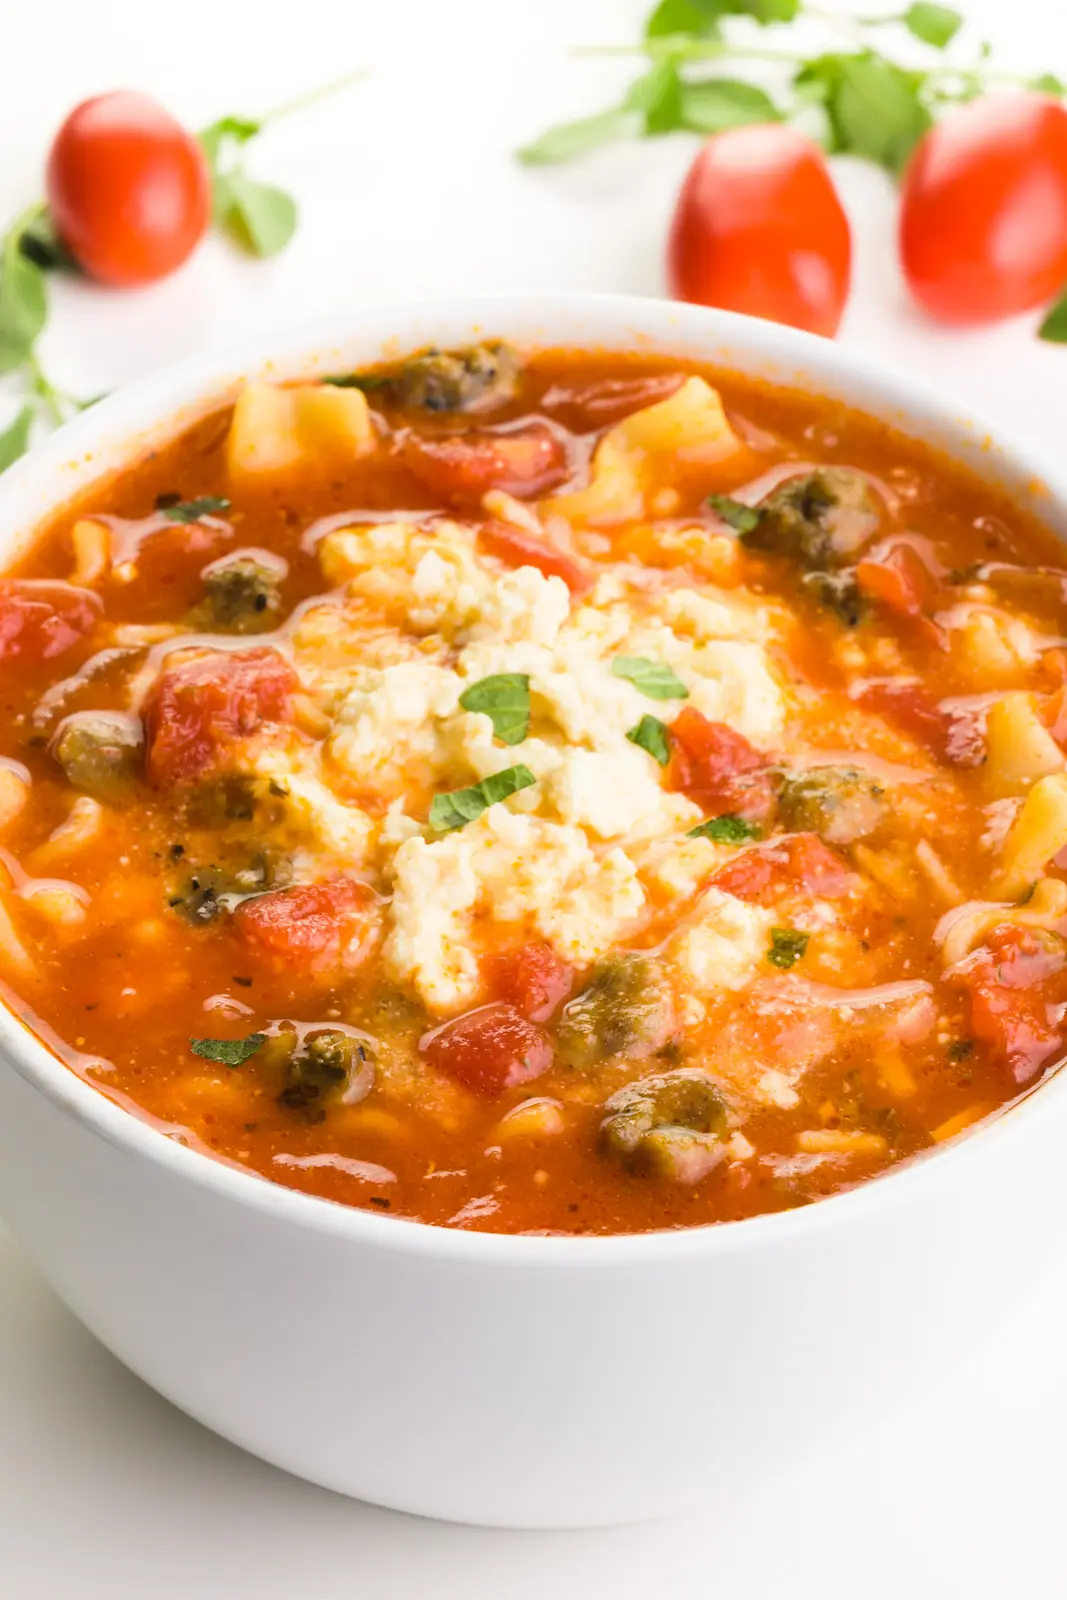 A bowl holds vegan lasagna soup with a creamy sauce on top. There are cherry tomatoes and fresh herbs around it.